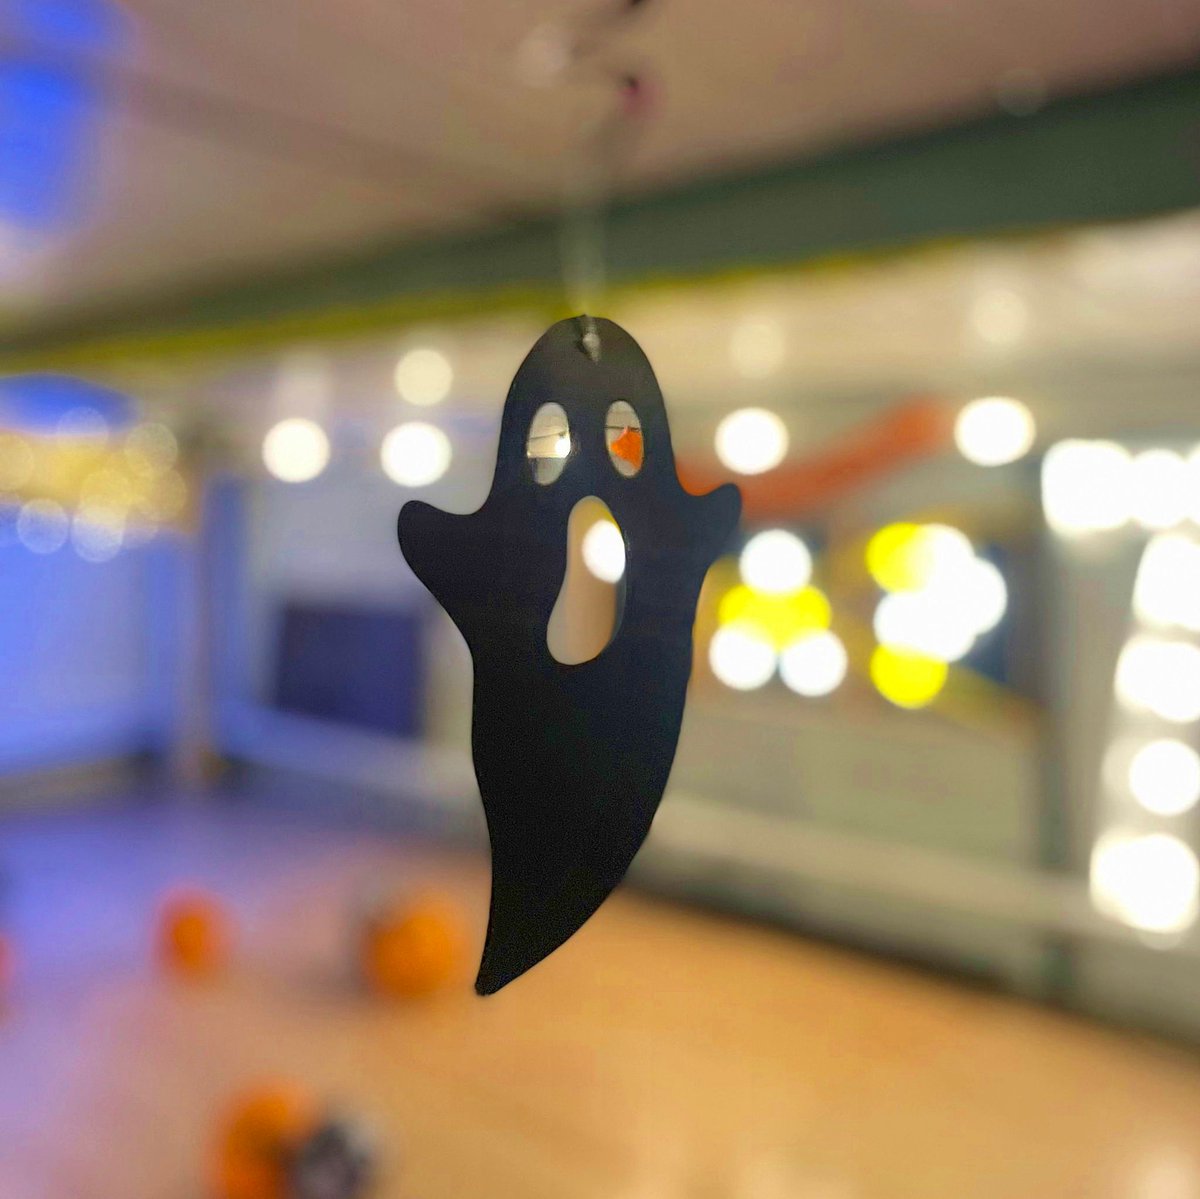 Who's joining us for our Halloween Party at our Middlewood Locks Beerhouse this Friday? 👻 Look forward to a seriously spooky evening filled with live music, costume competition with prizes, delicious food & drinks & much more... Don't be a scaredy cat - come & join us 🎃🕺🥂